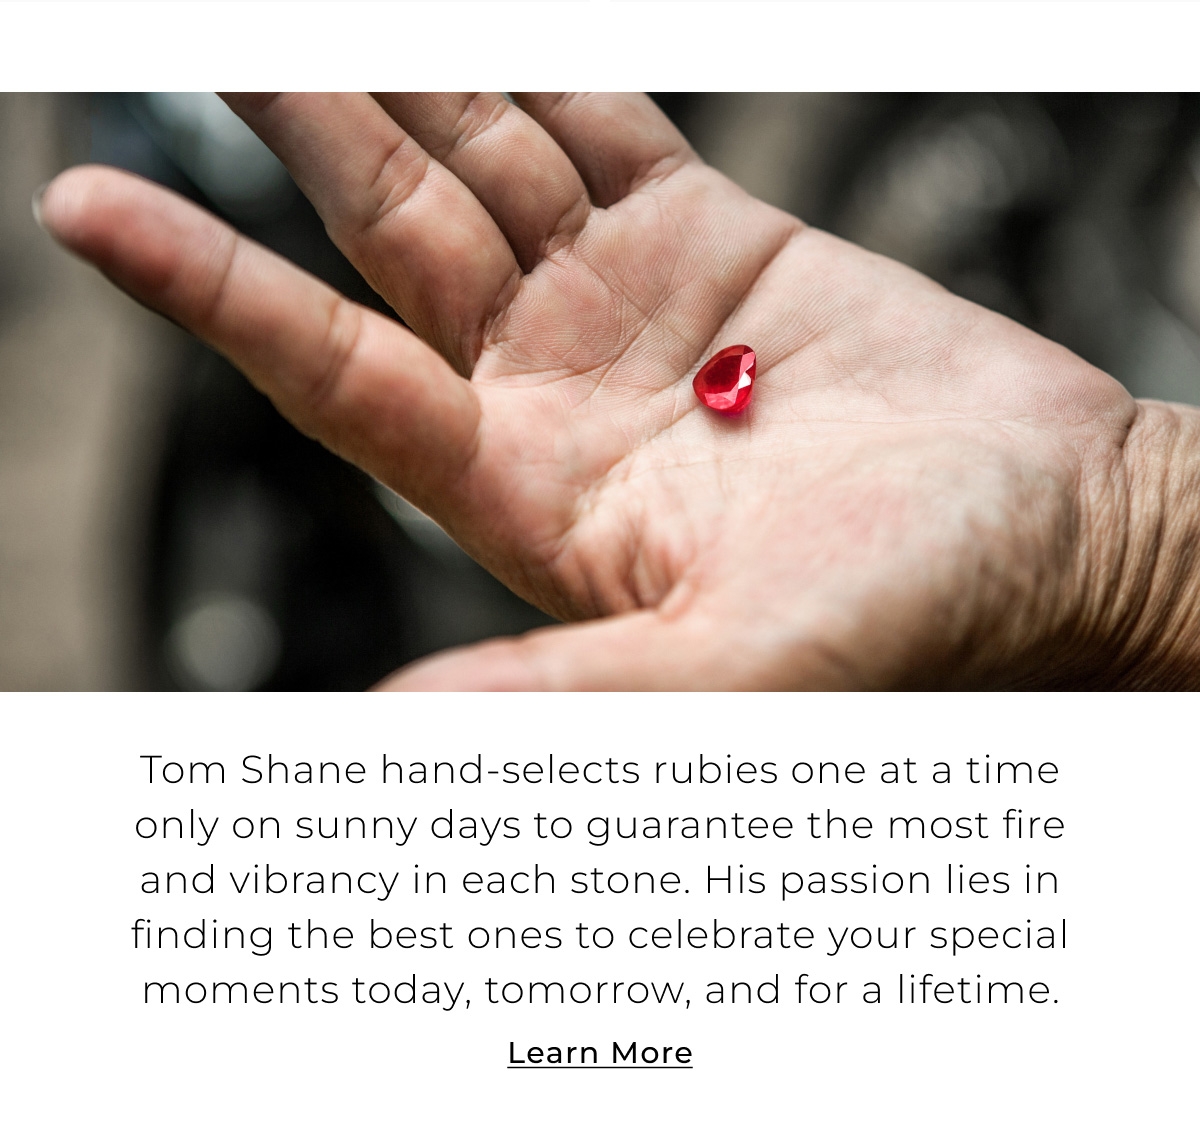 Tom Shane hand-selects rubies one at a time only on sunny days to guarantee the most fire and vibrancy in each stone. His passion lies in finding the best ones to celebrate your special moments today, tomorrow, and for a lifetime. Learn More >